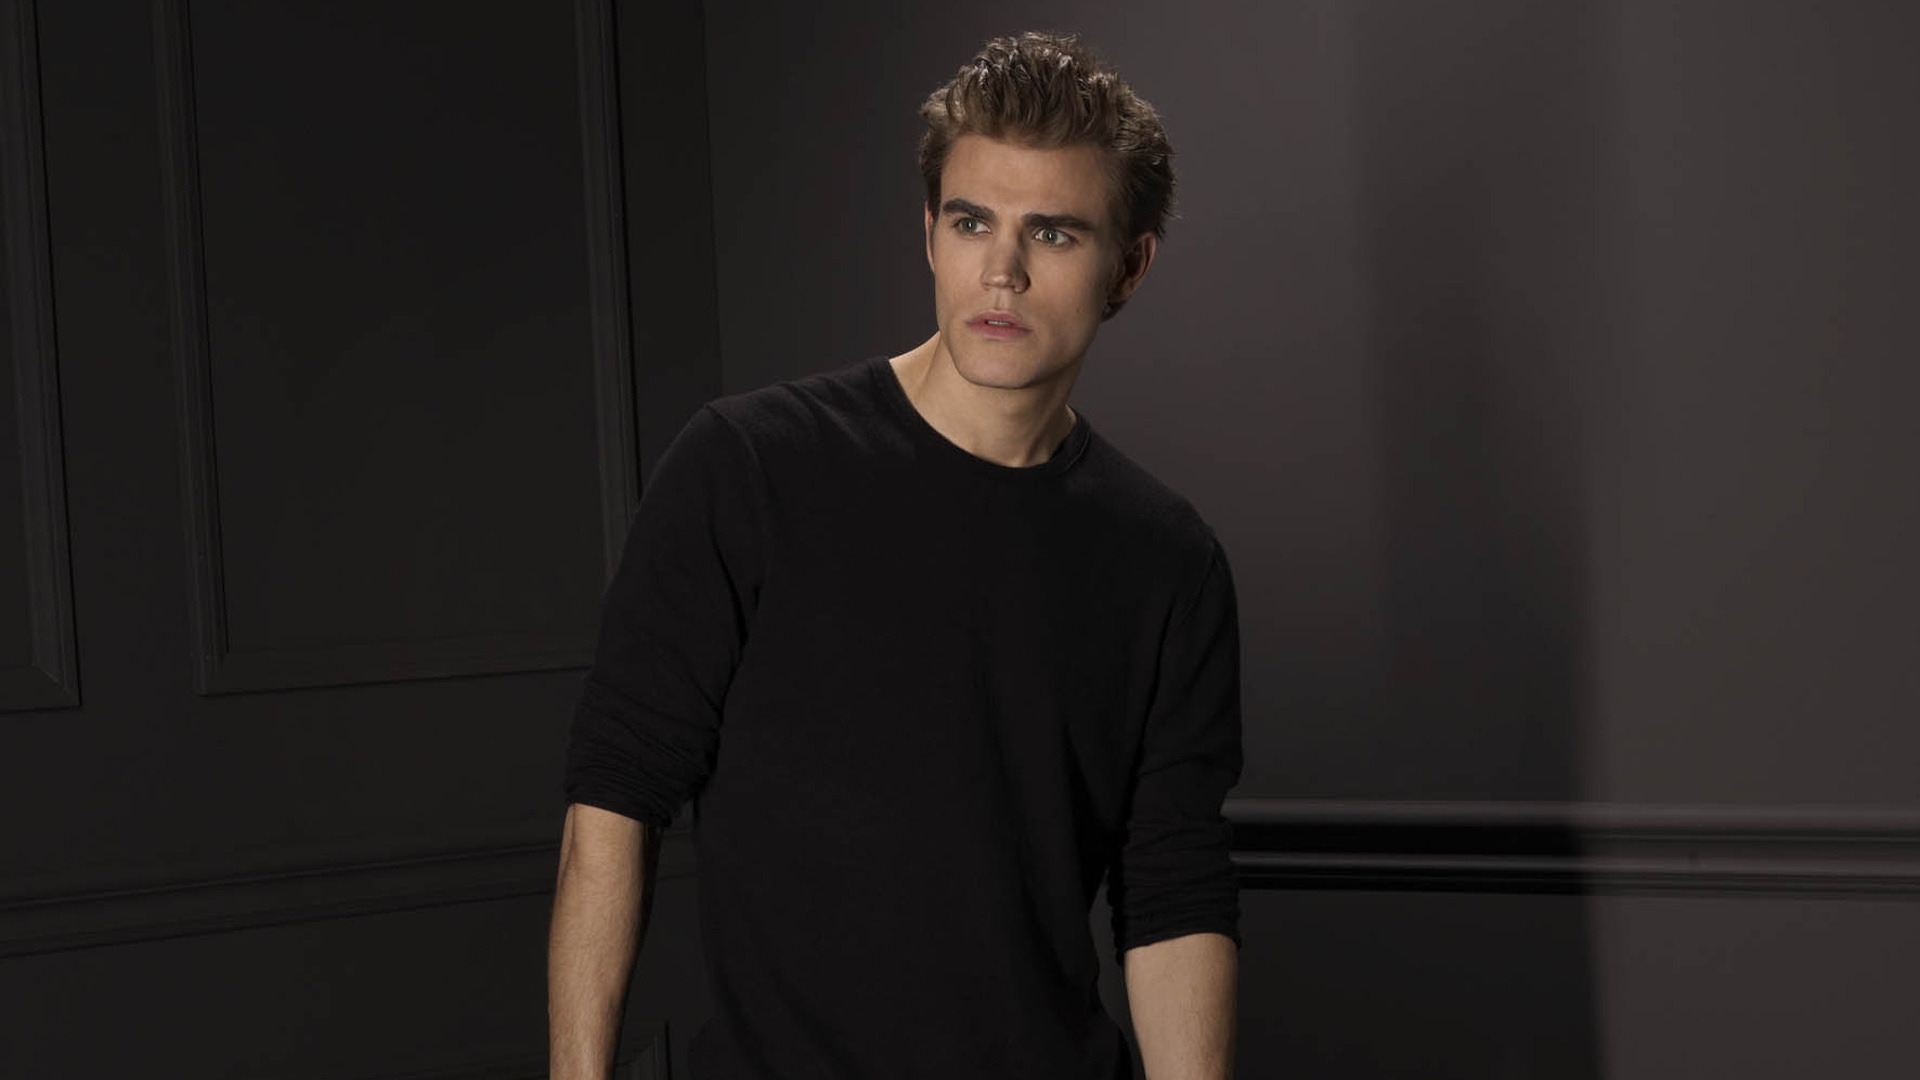 Paul Wesley Look for 1920 x 1080 HDTV 1080p resolution